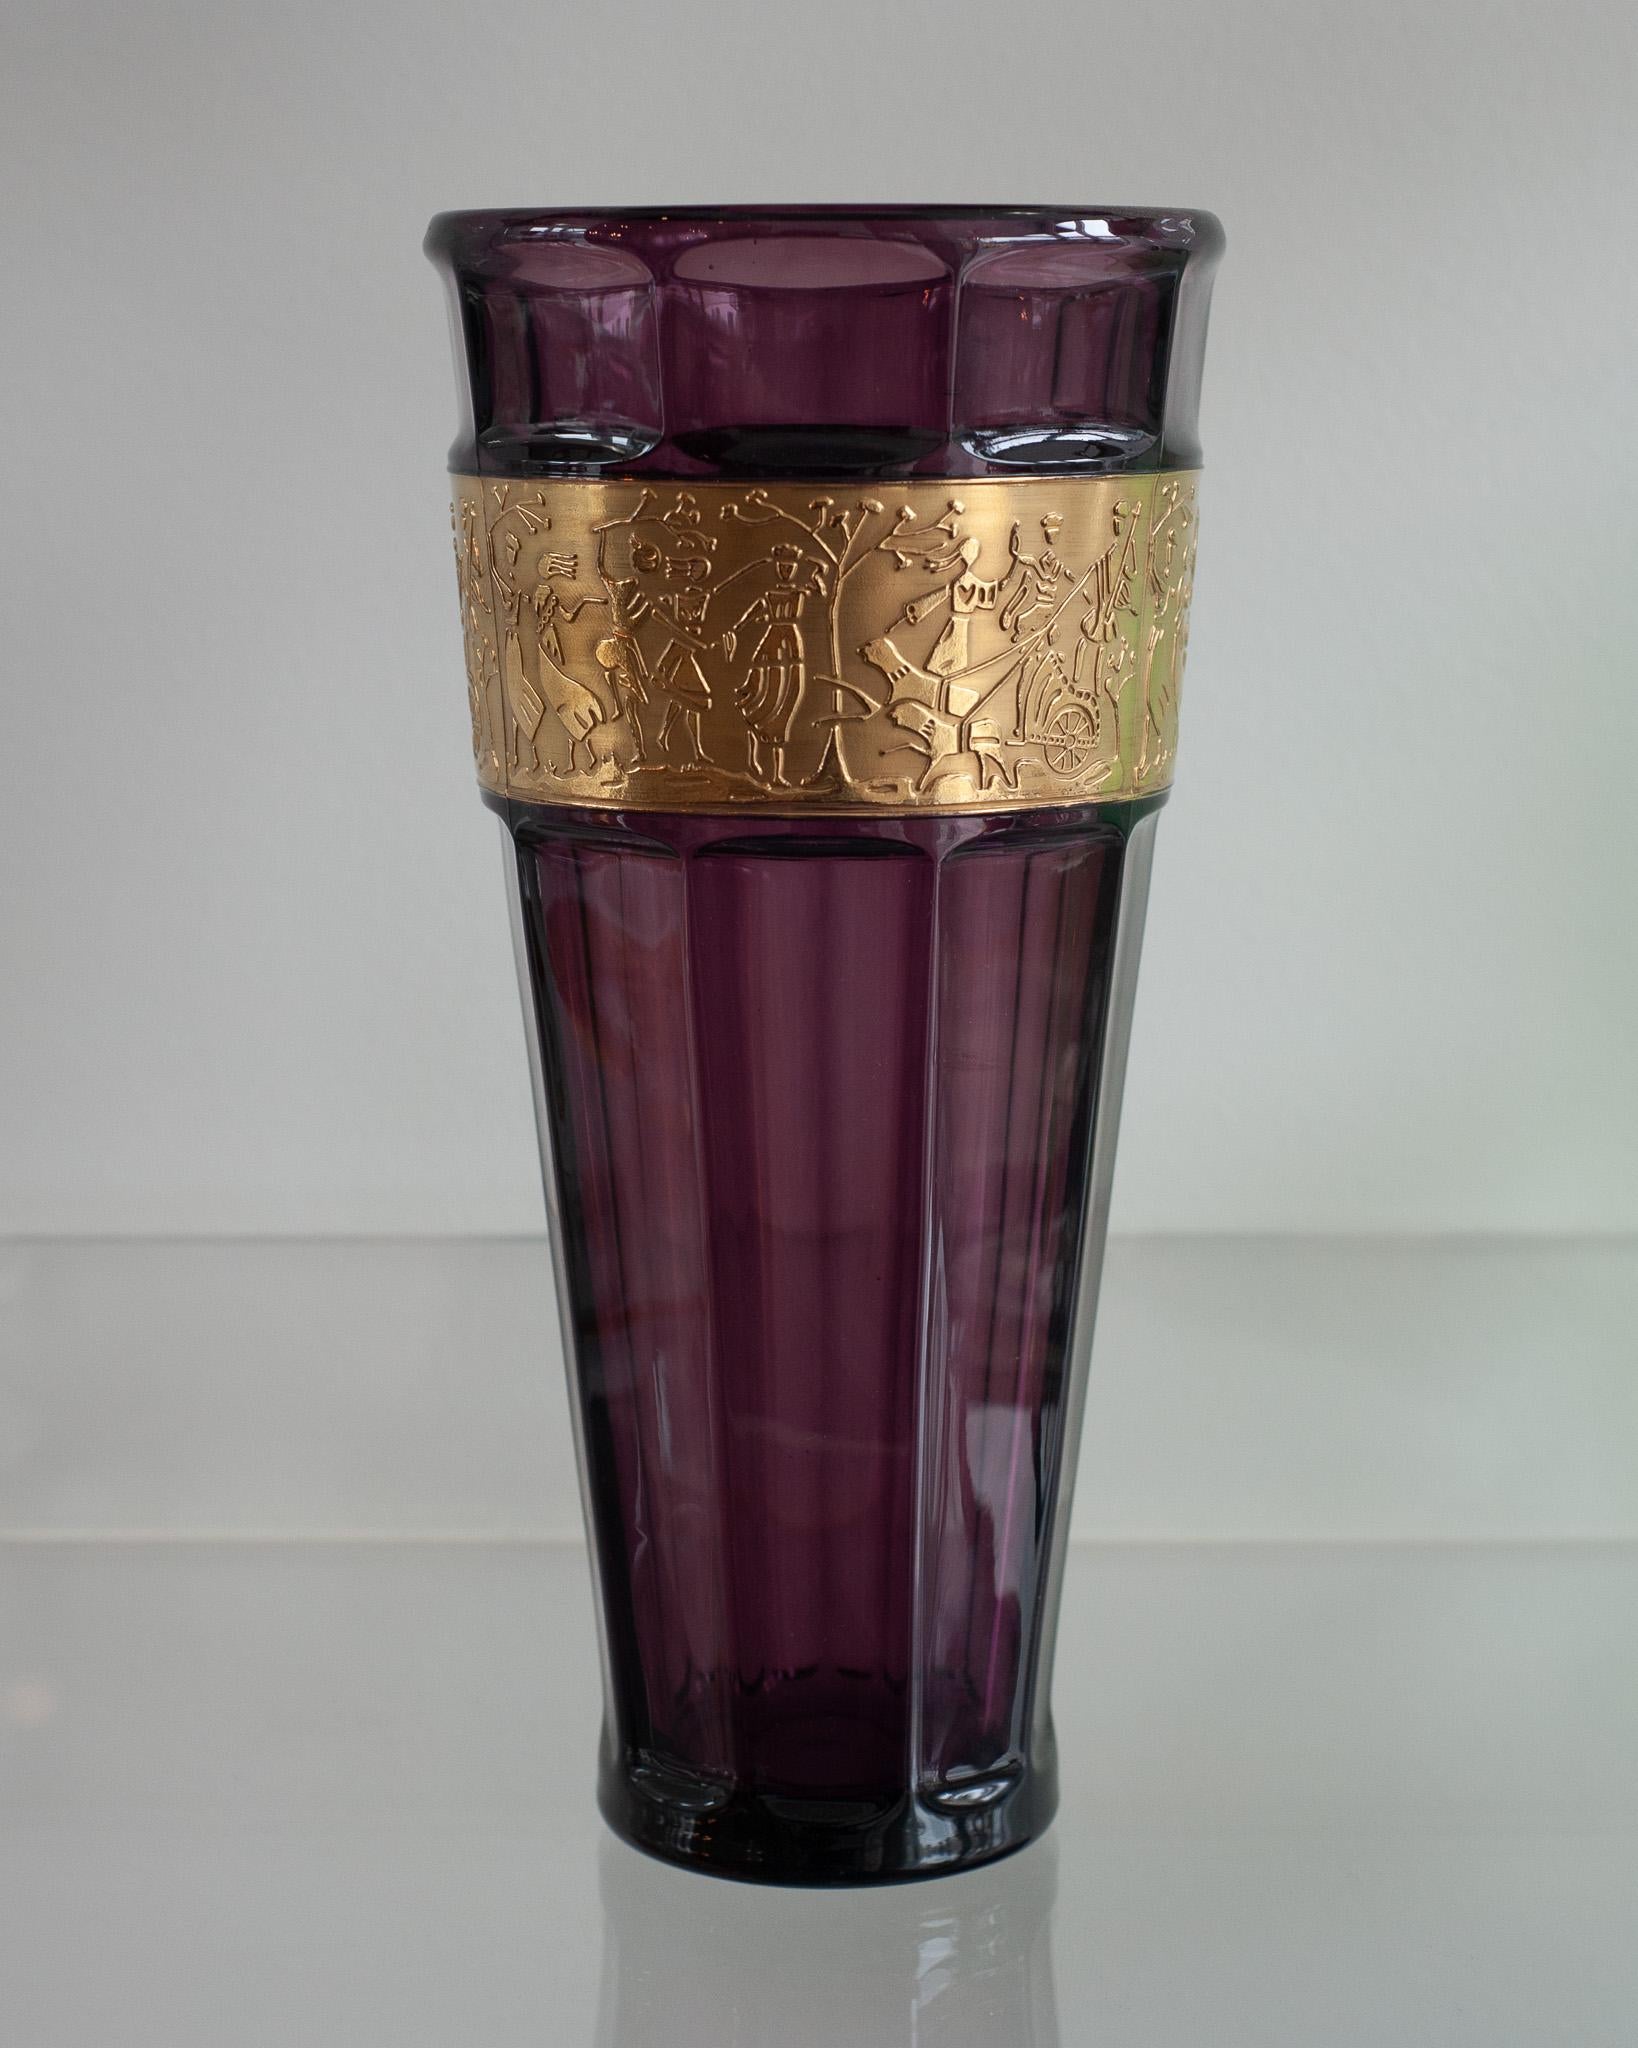 A beautiful Moser amethyst vase with gold gilded frieze. Hand blown purple crystal with a wide band of gold around the body, decorated with a cameo cut scene with antique roman figures. A classic and timeless Moser style.